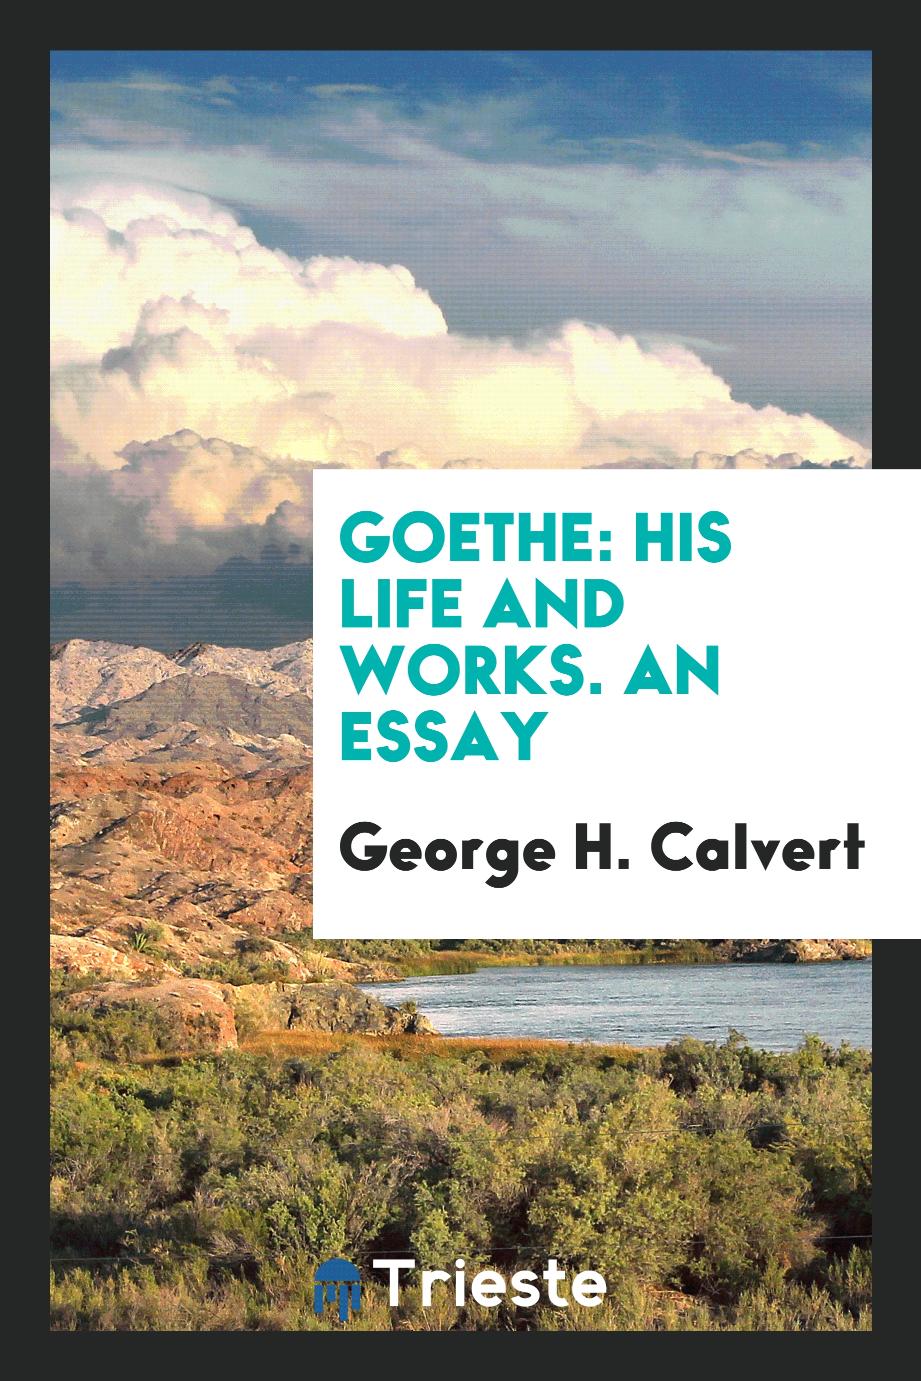 Goethe: his life and works. An essay